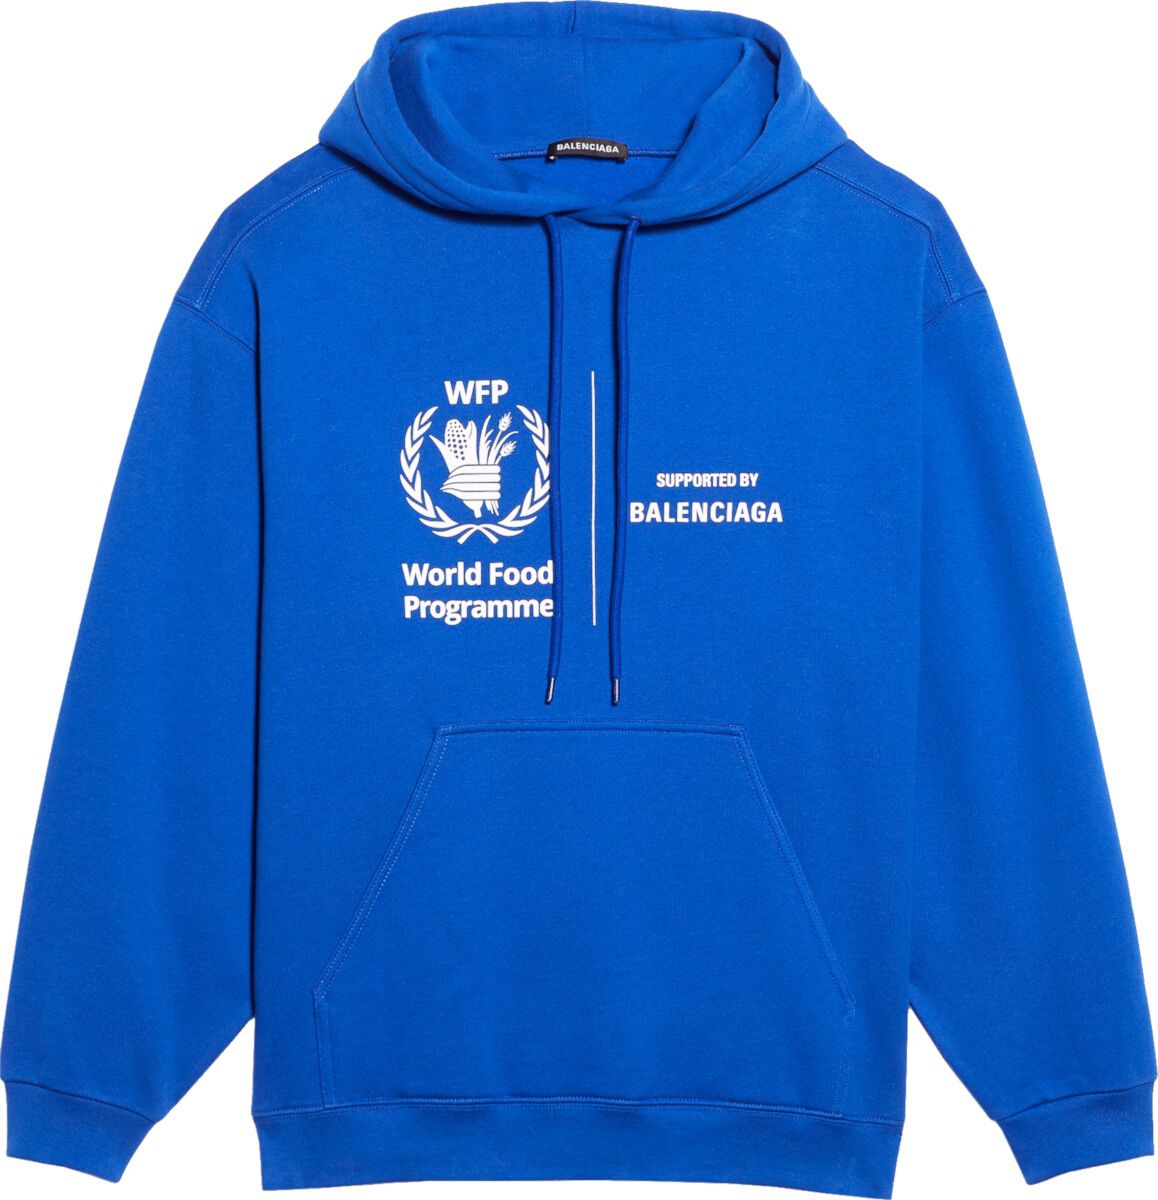 under tale Genbruge Balenciaga Men's World Food Programme Hoodie Blue Size Medium (Fits  Oversized) for Sale in Brooklyn, NY - OfferUp